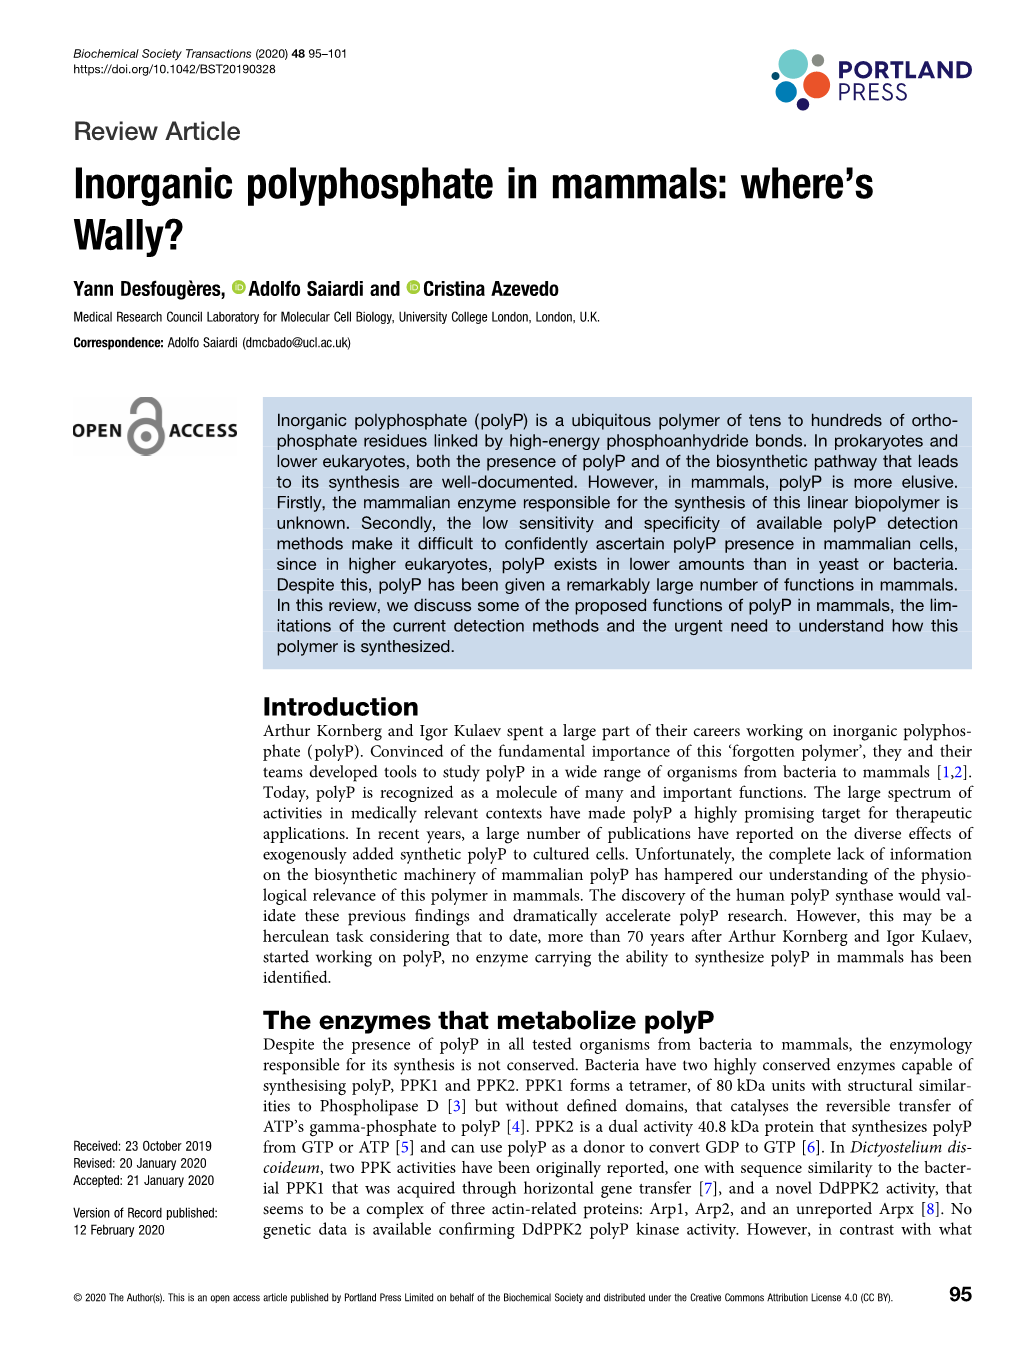 Inorganic Polyphosphate in Mammals: Where’S Wally?